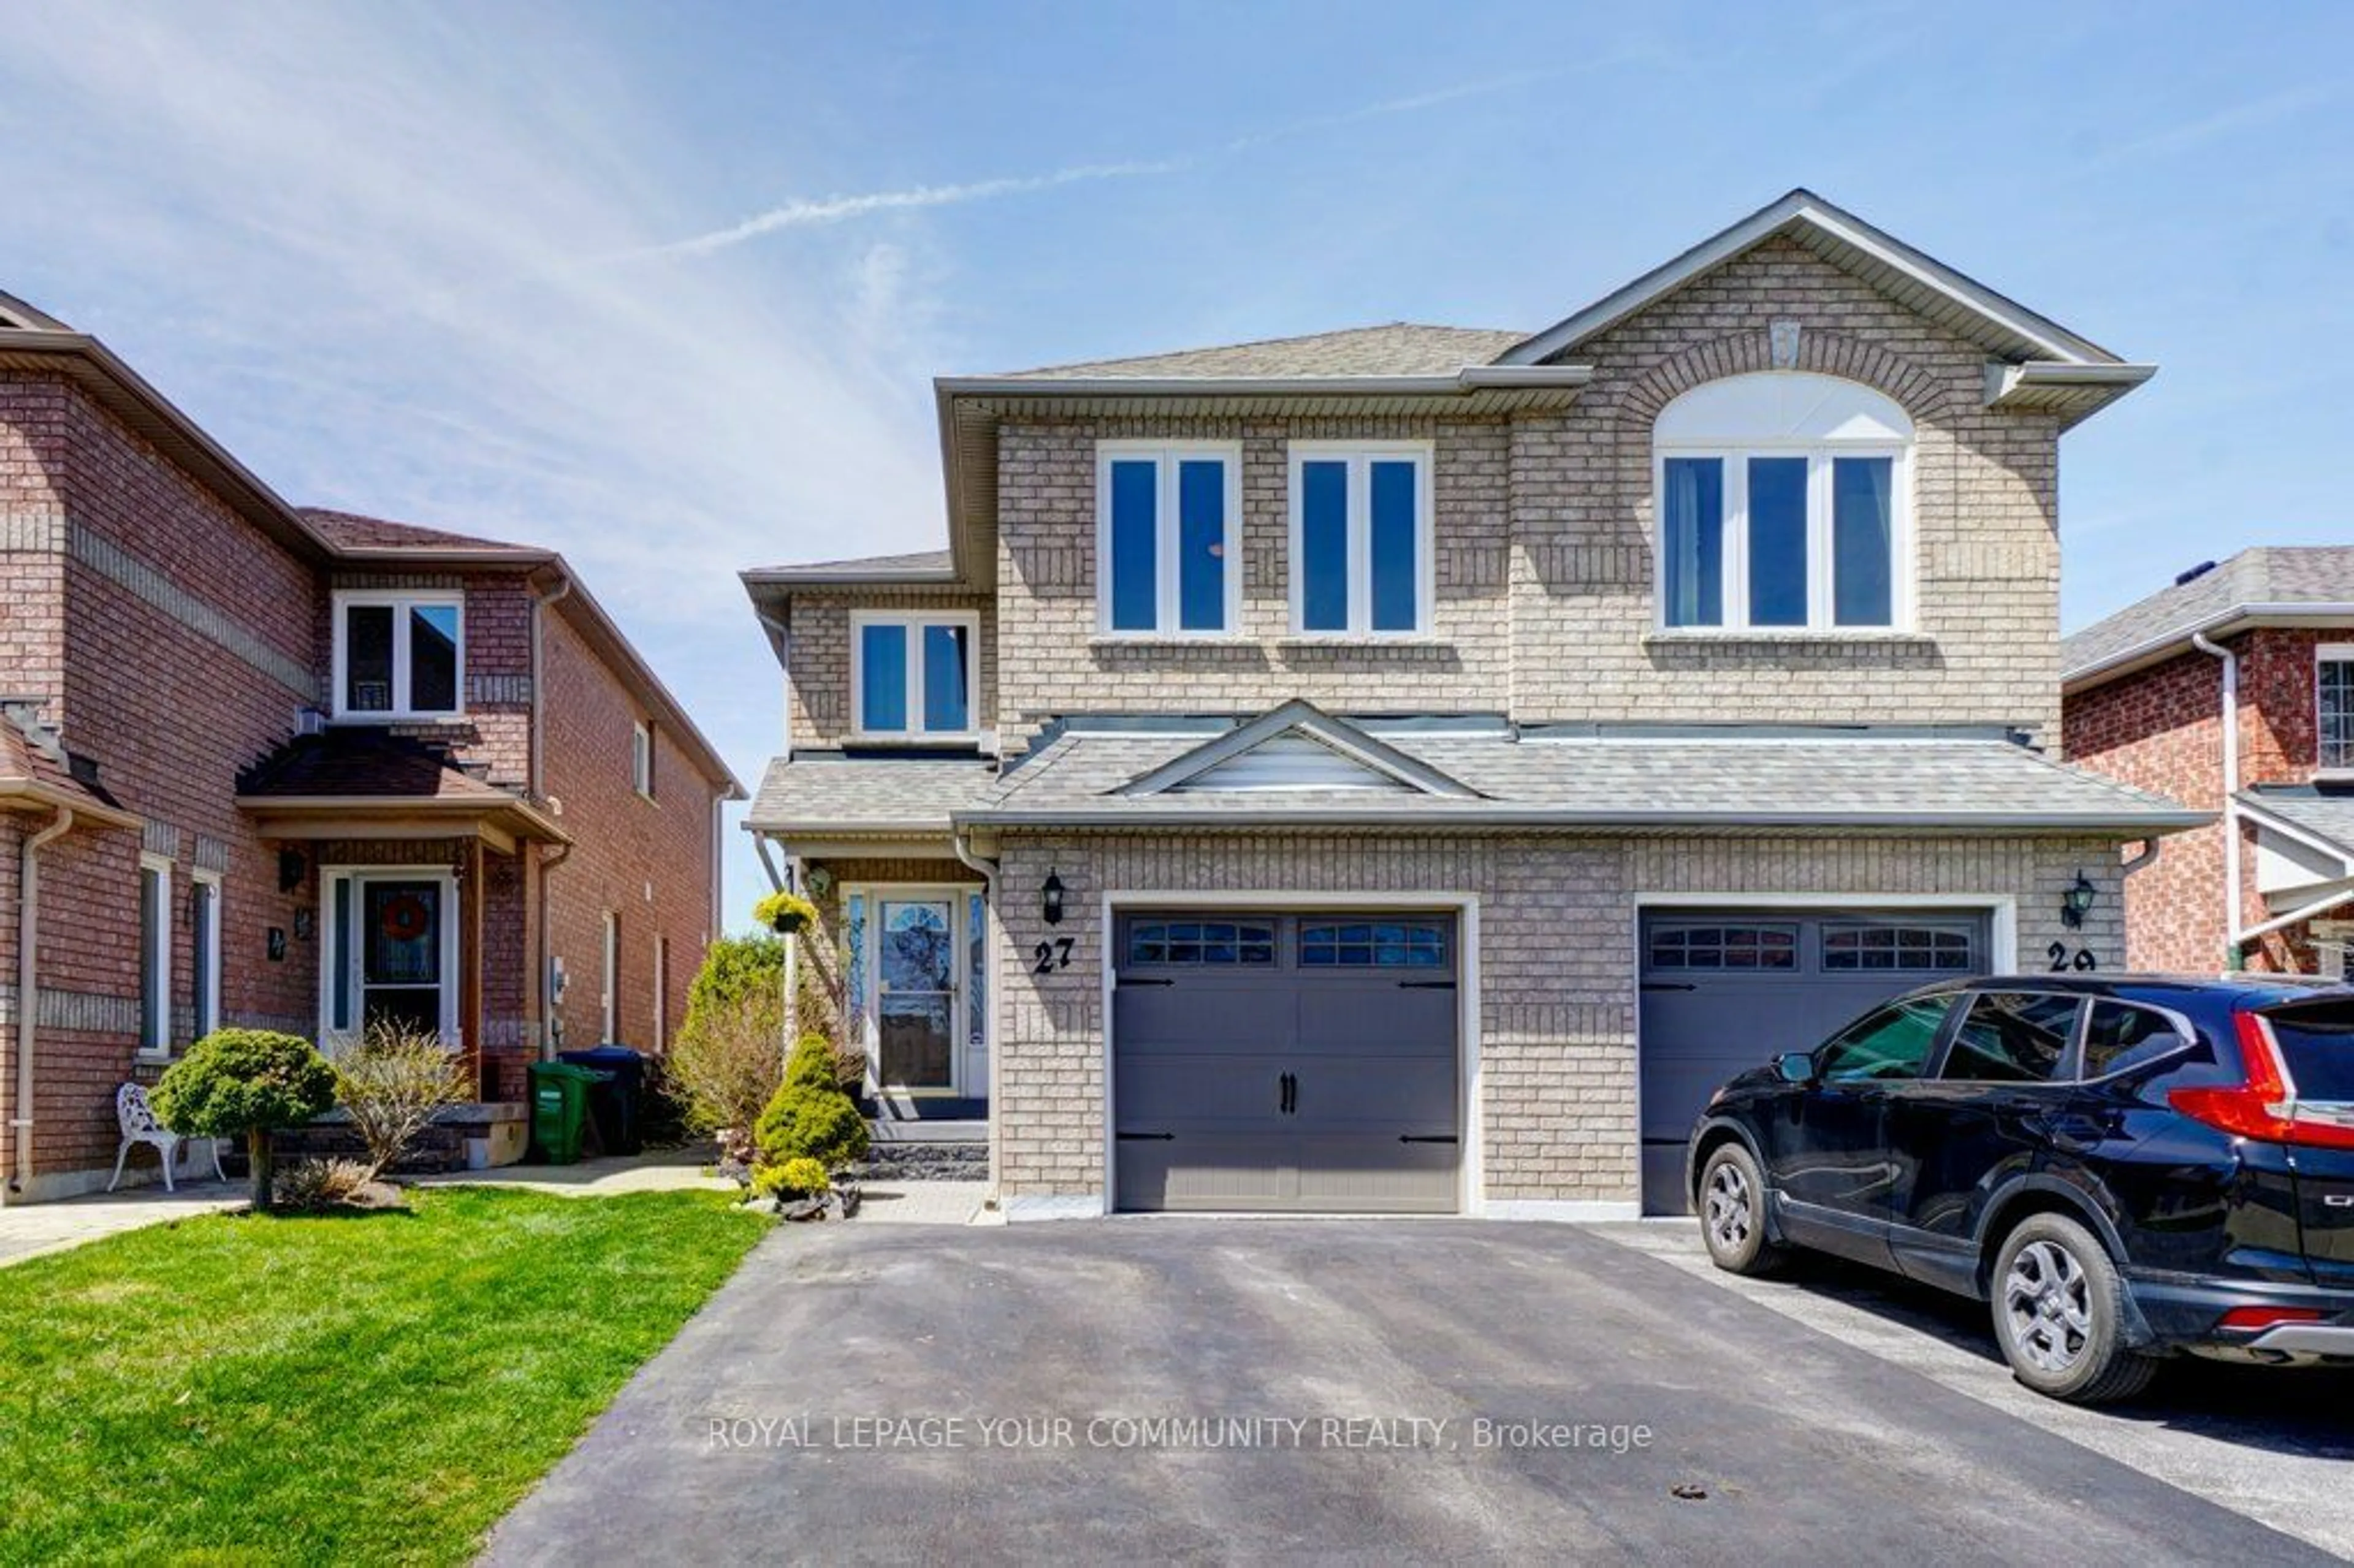 Home with brick exterior material for 27 Hubert Corless Dr, Caledon Ontario L7E 1W7